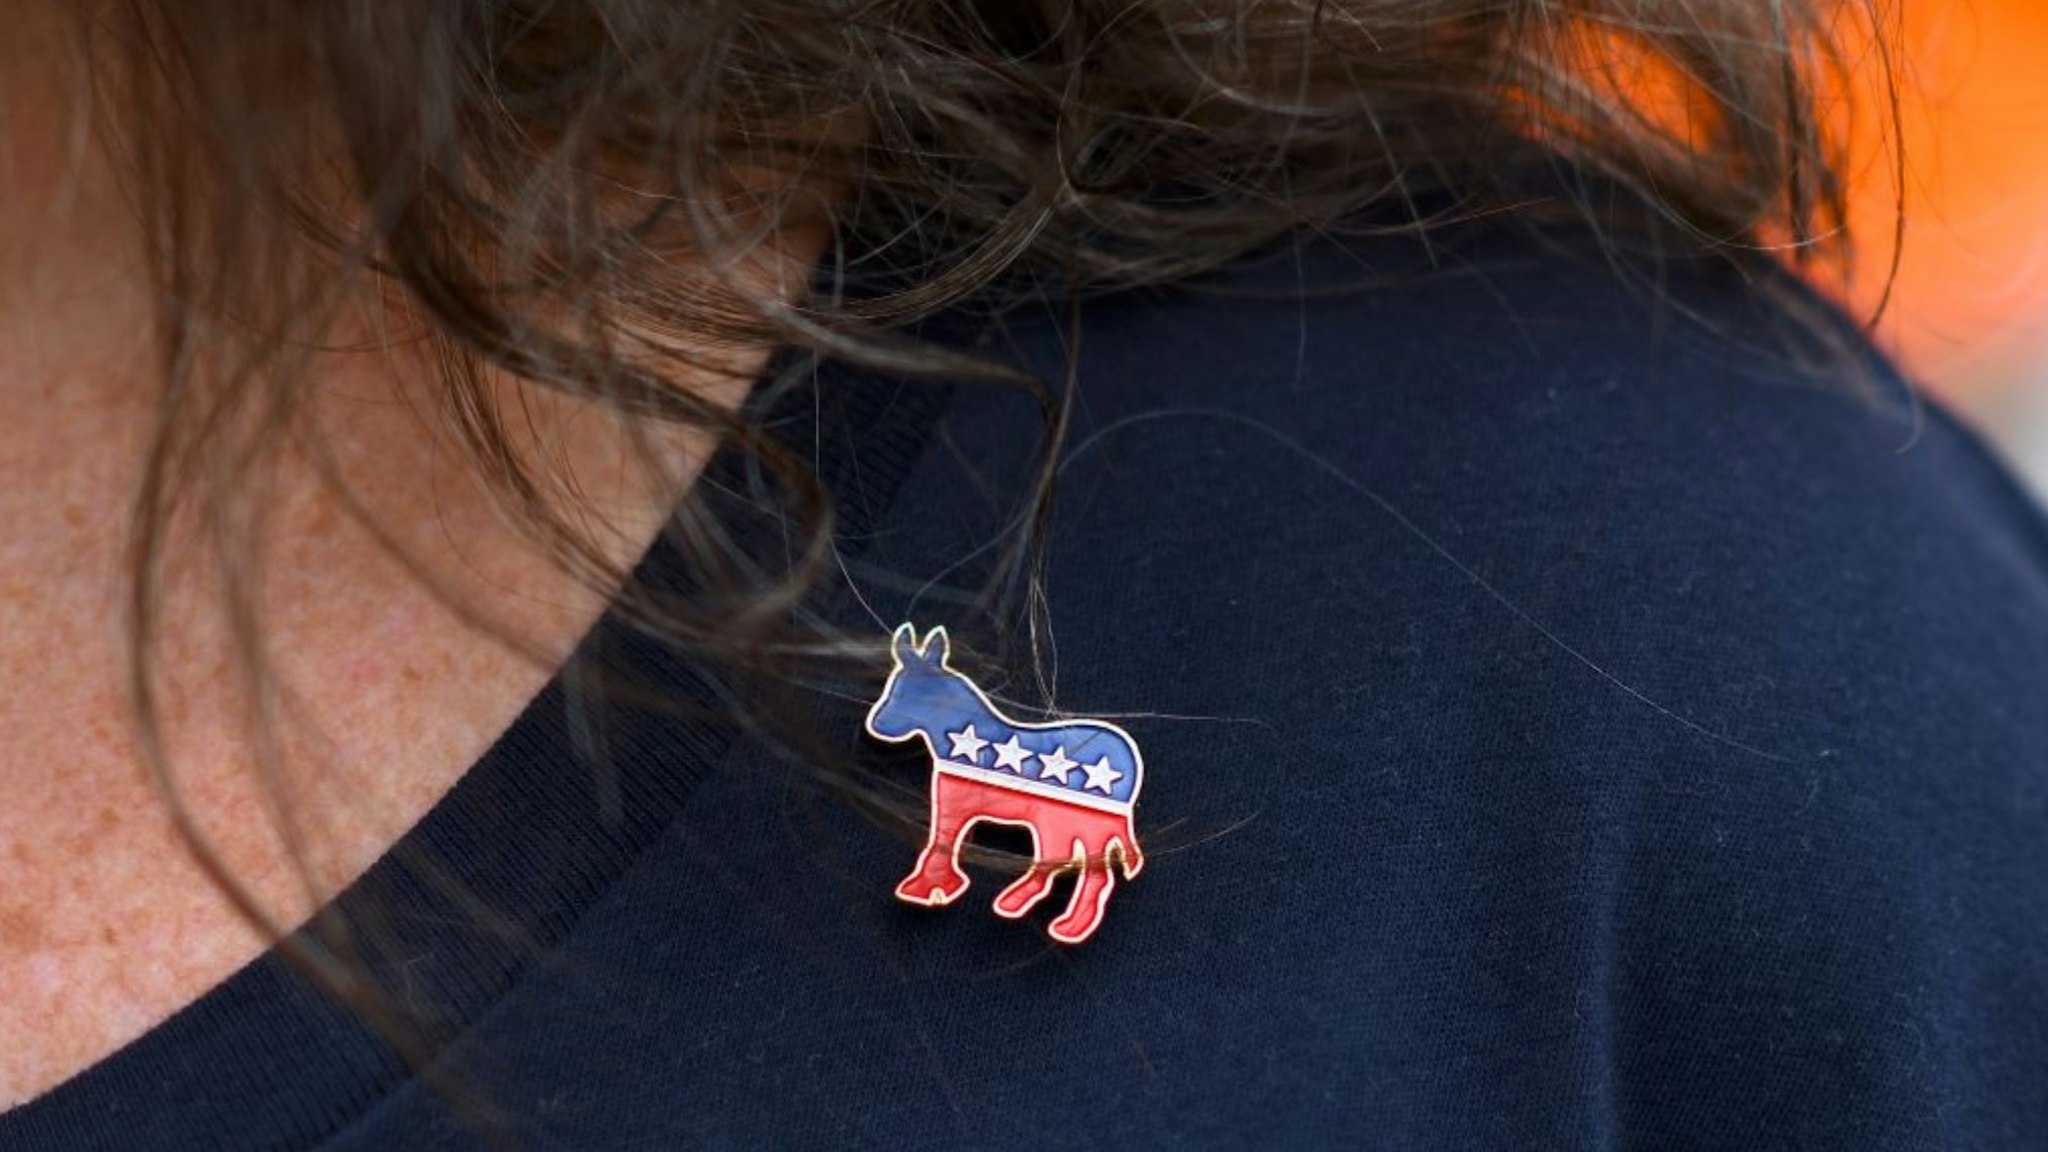 Donna Elms wears a Democrat donkey pin while lining up outside in advance of a campaign rally with former President Barack Obama, Pennsylvania Governor Tom Wolf, and Senator Bob Casey (D- PA) on September 21, 2018 in Philadelphia.